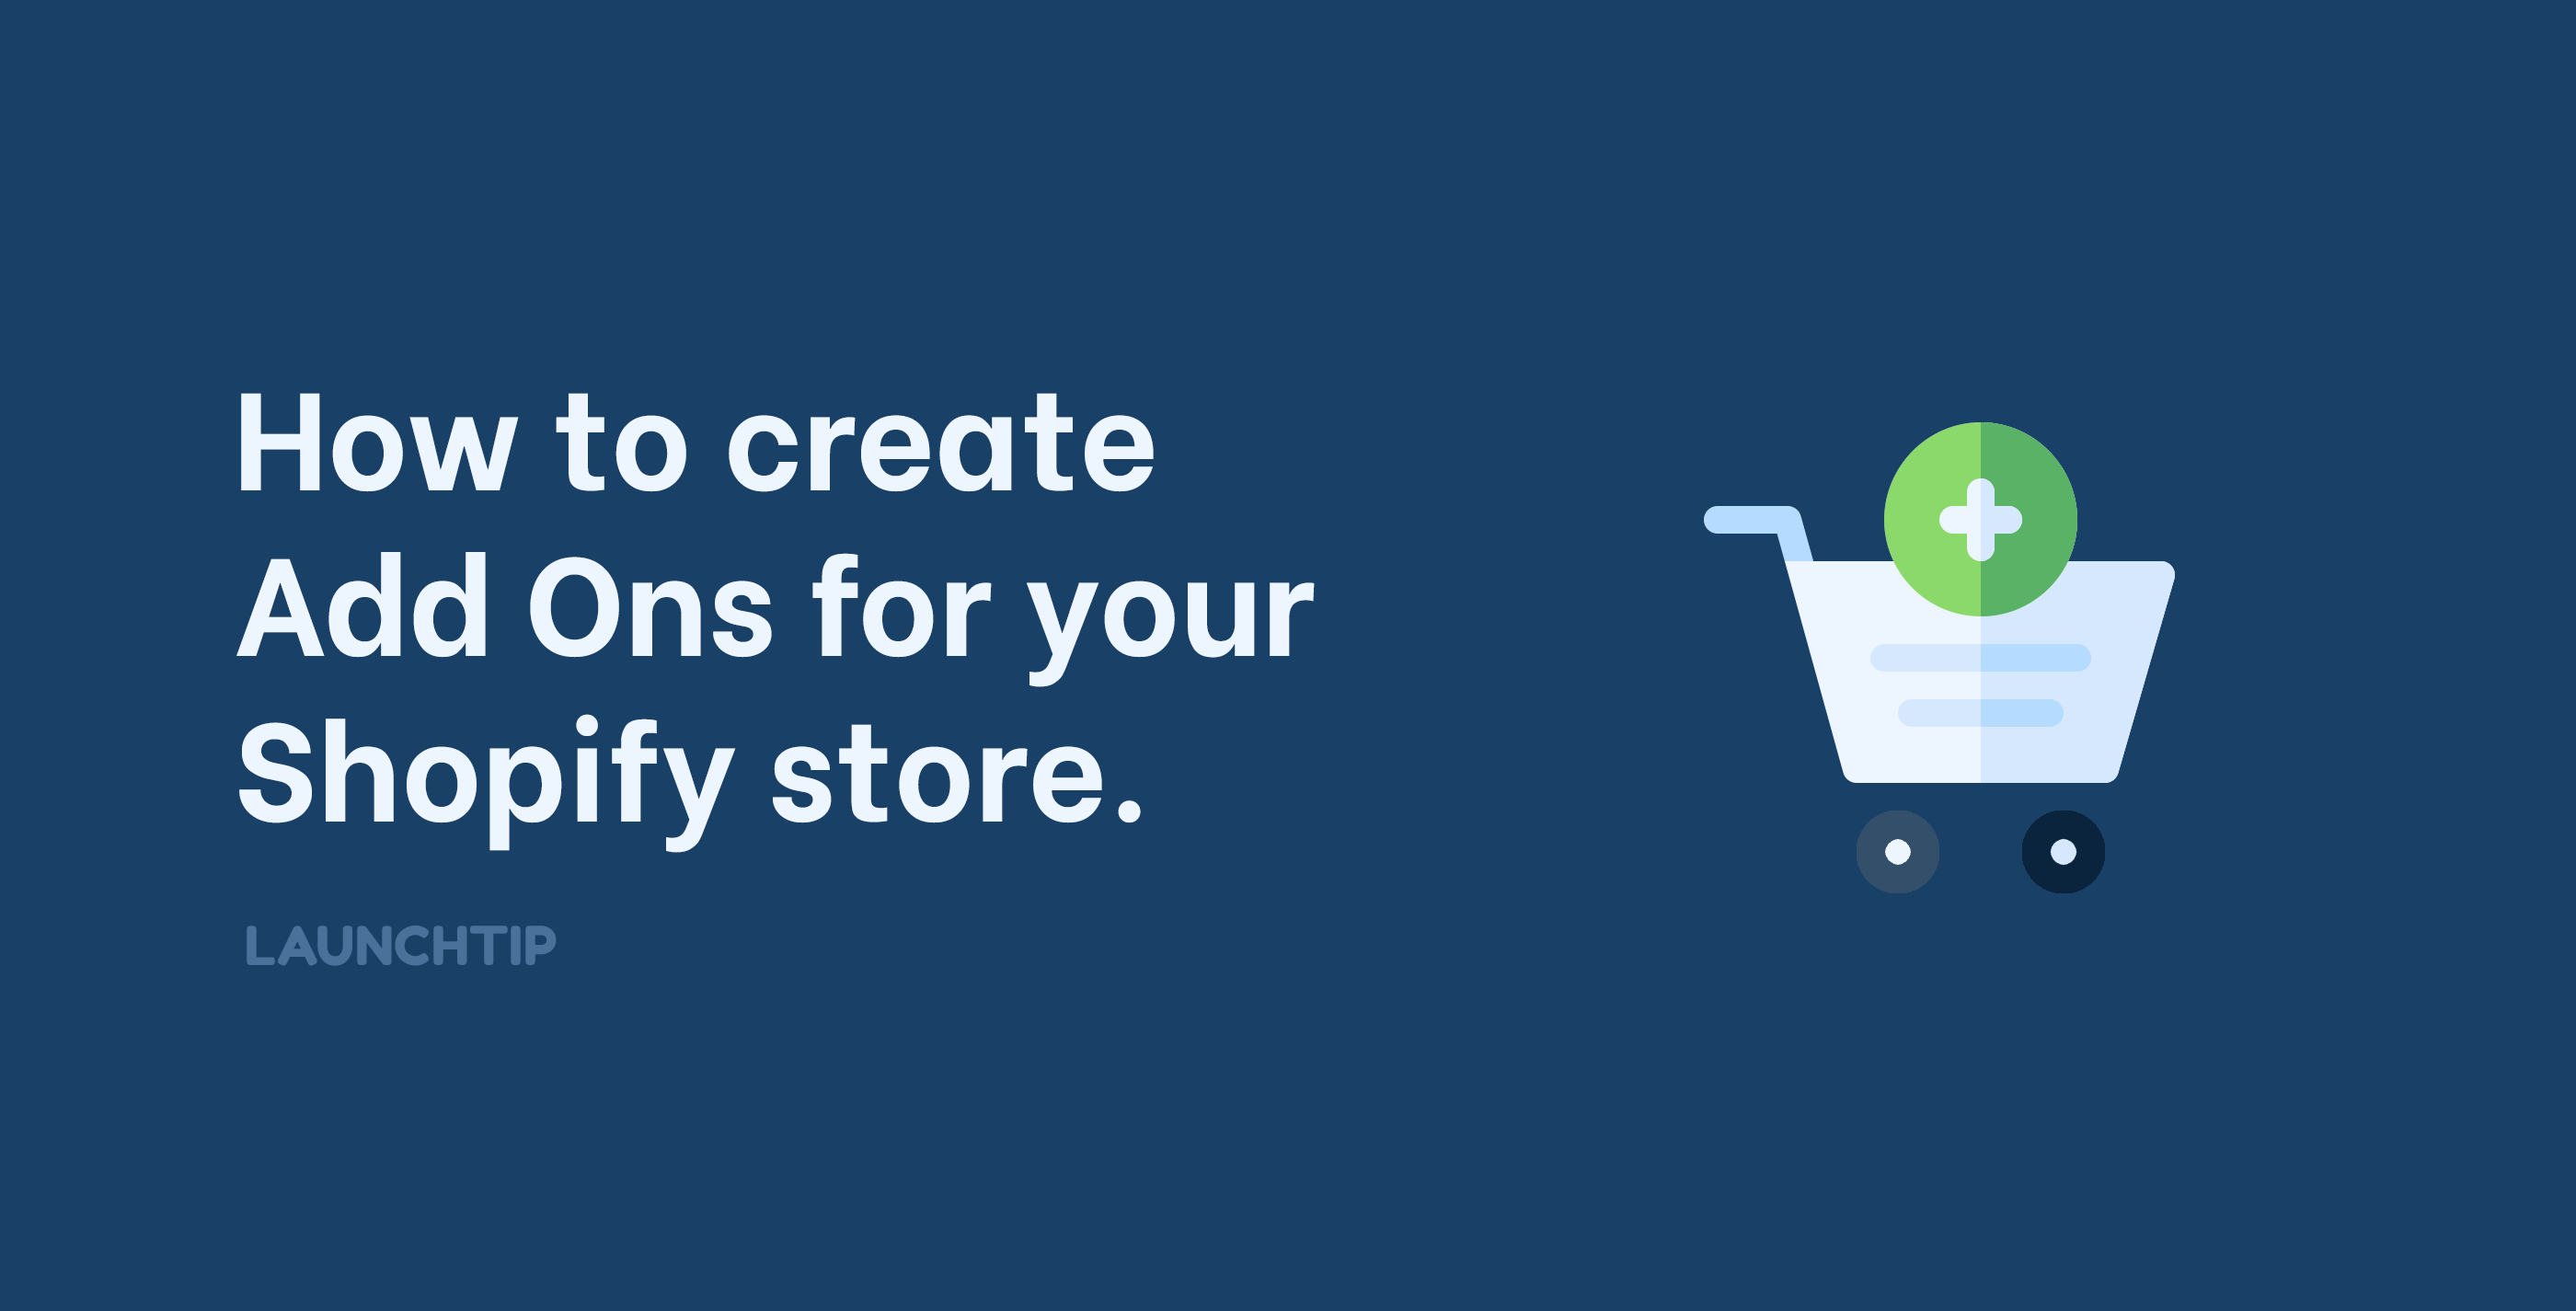 How to create add ons for Shopify